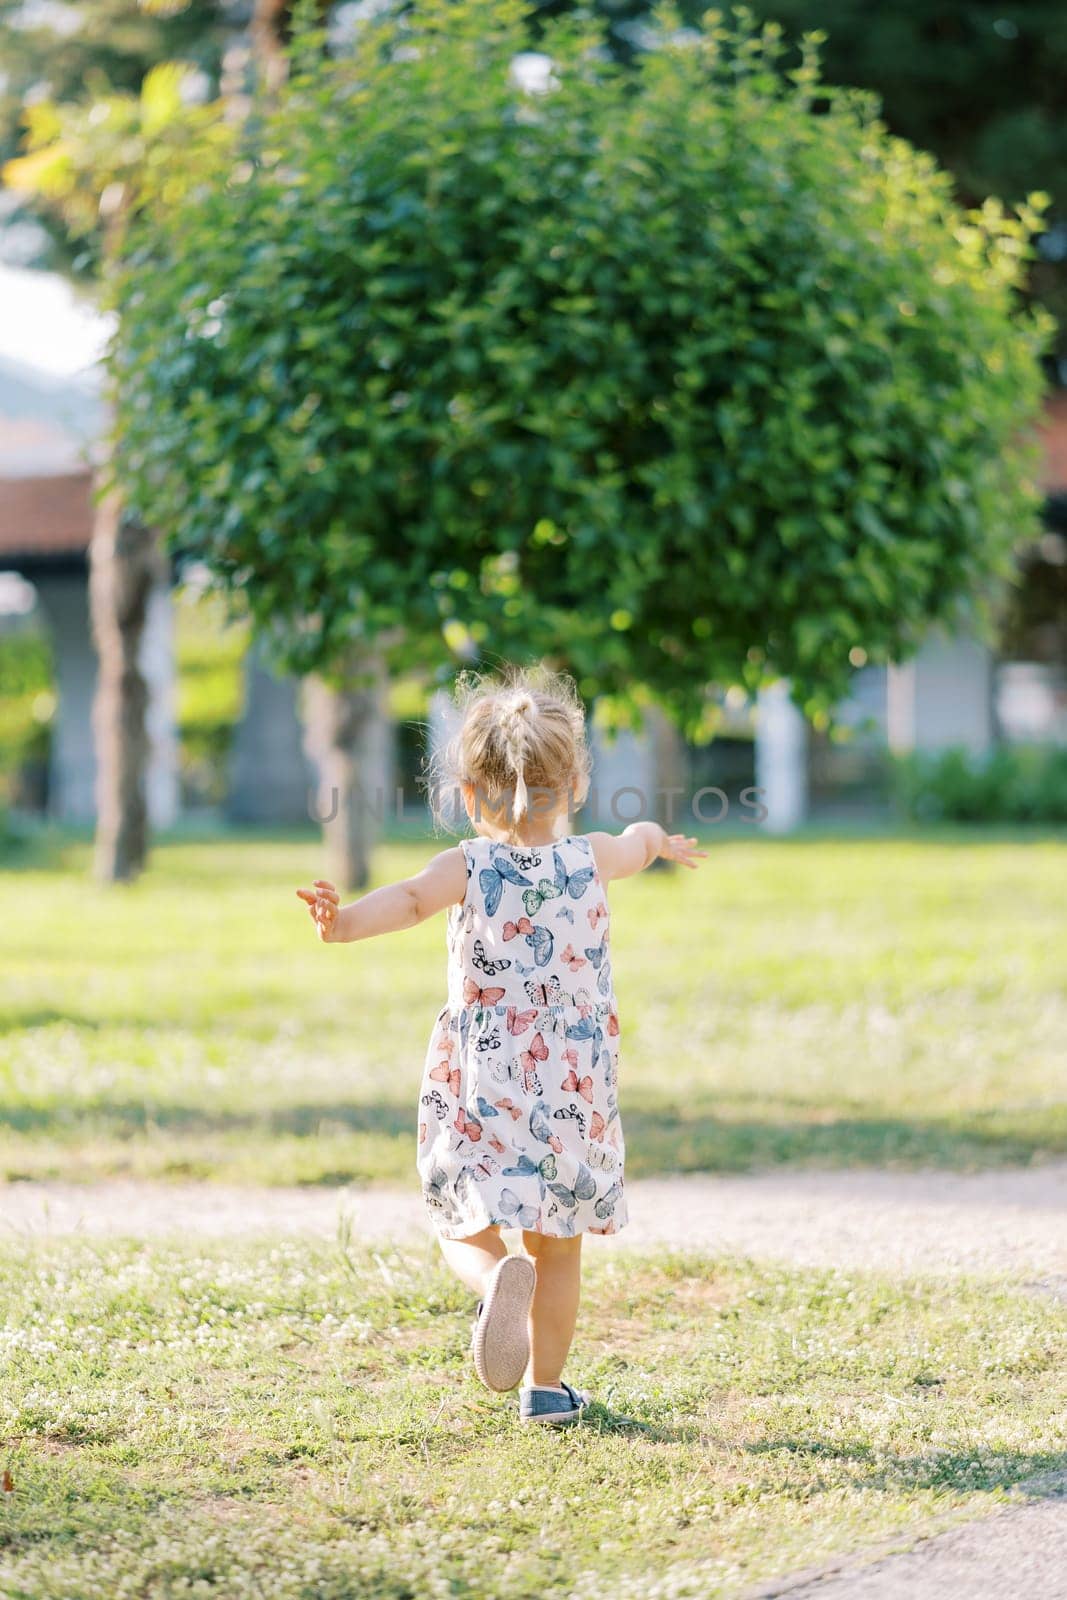 Little girl walks across a sunny lawn towards a green tree waving her arms. Back view. High quality photo